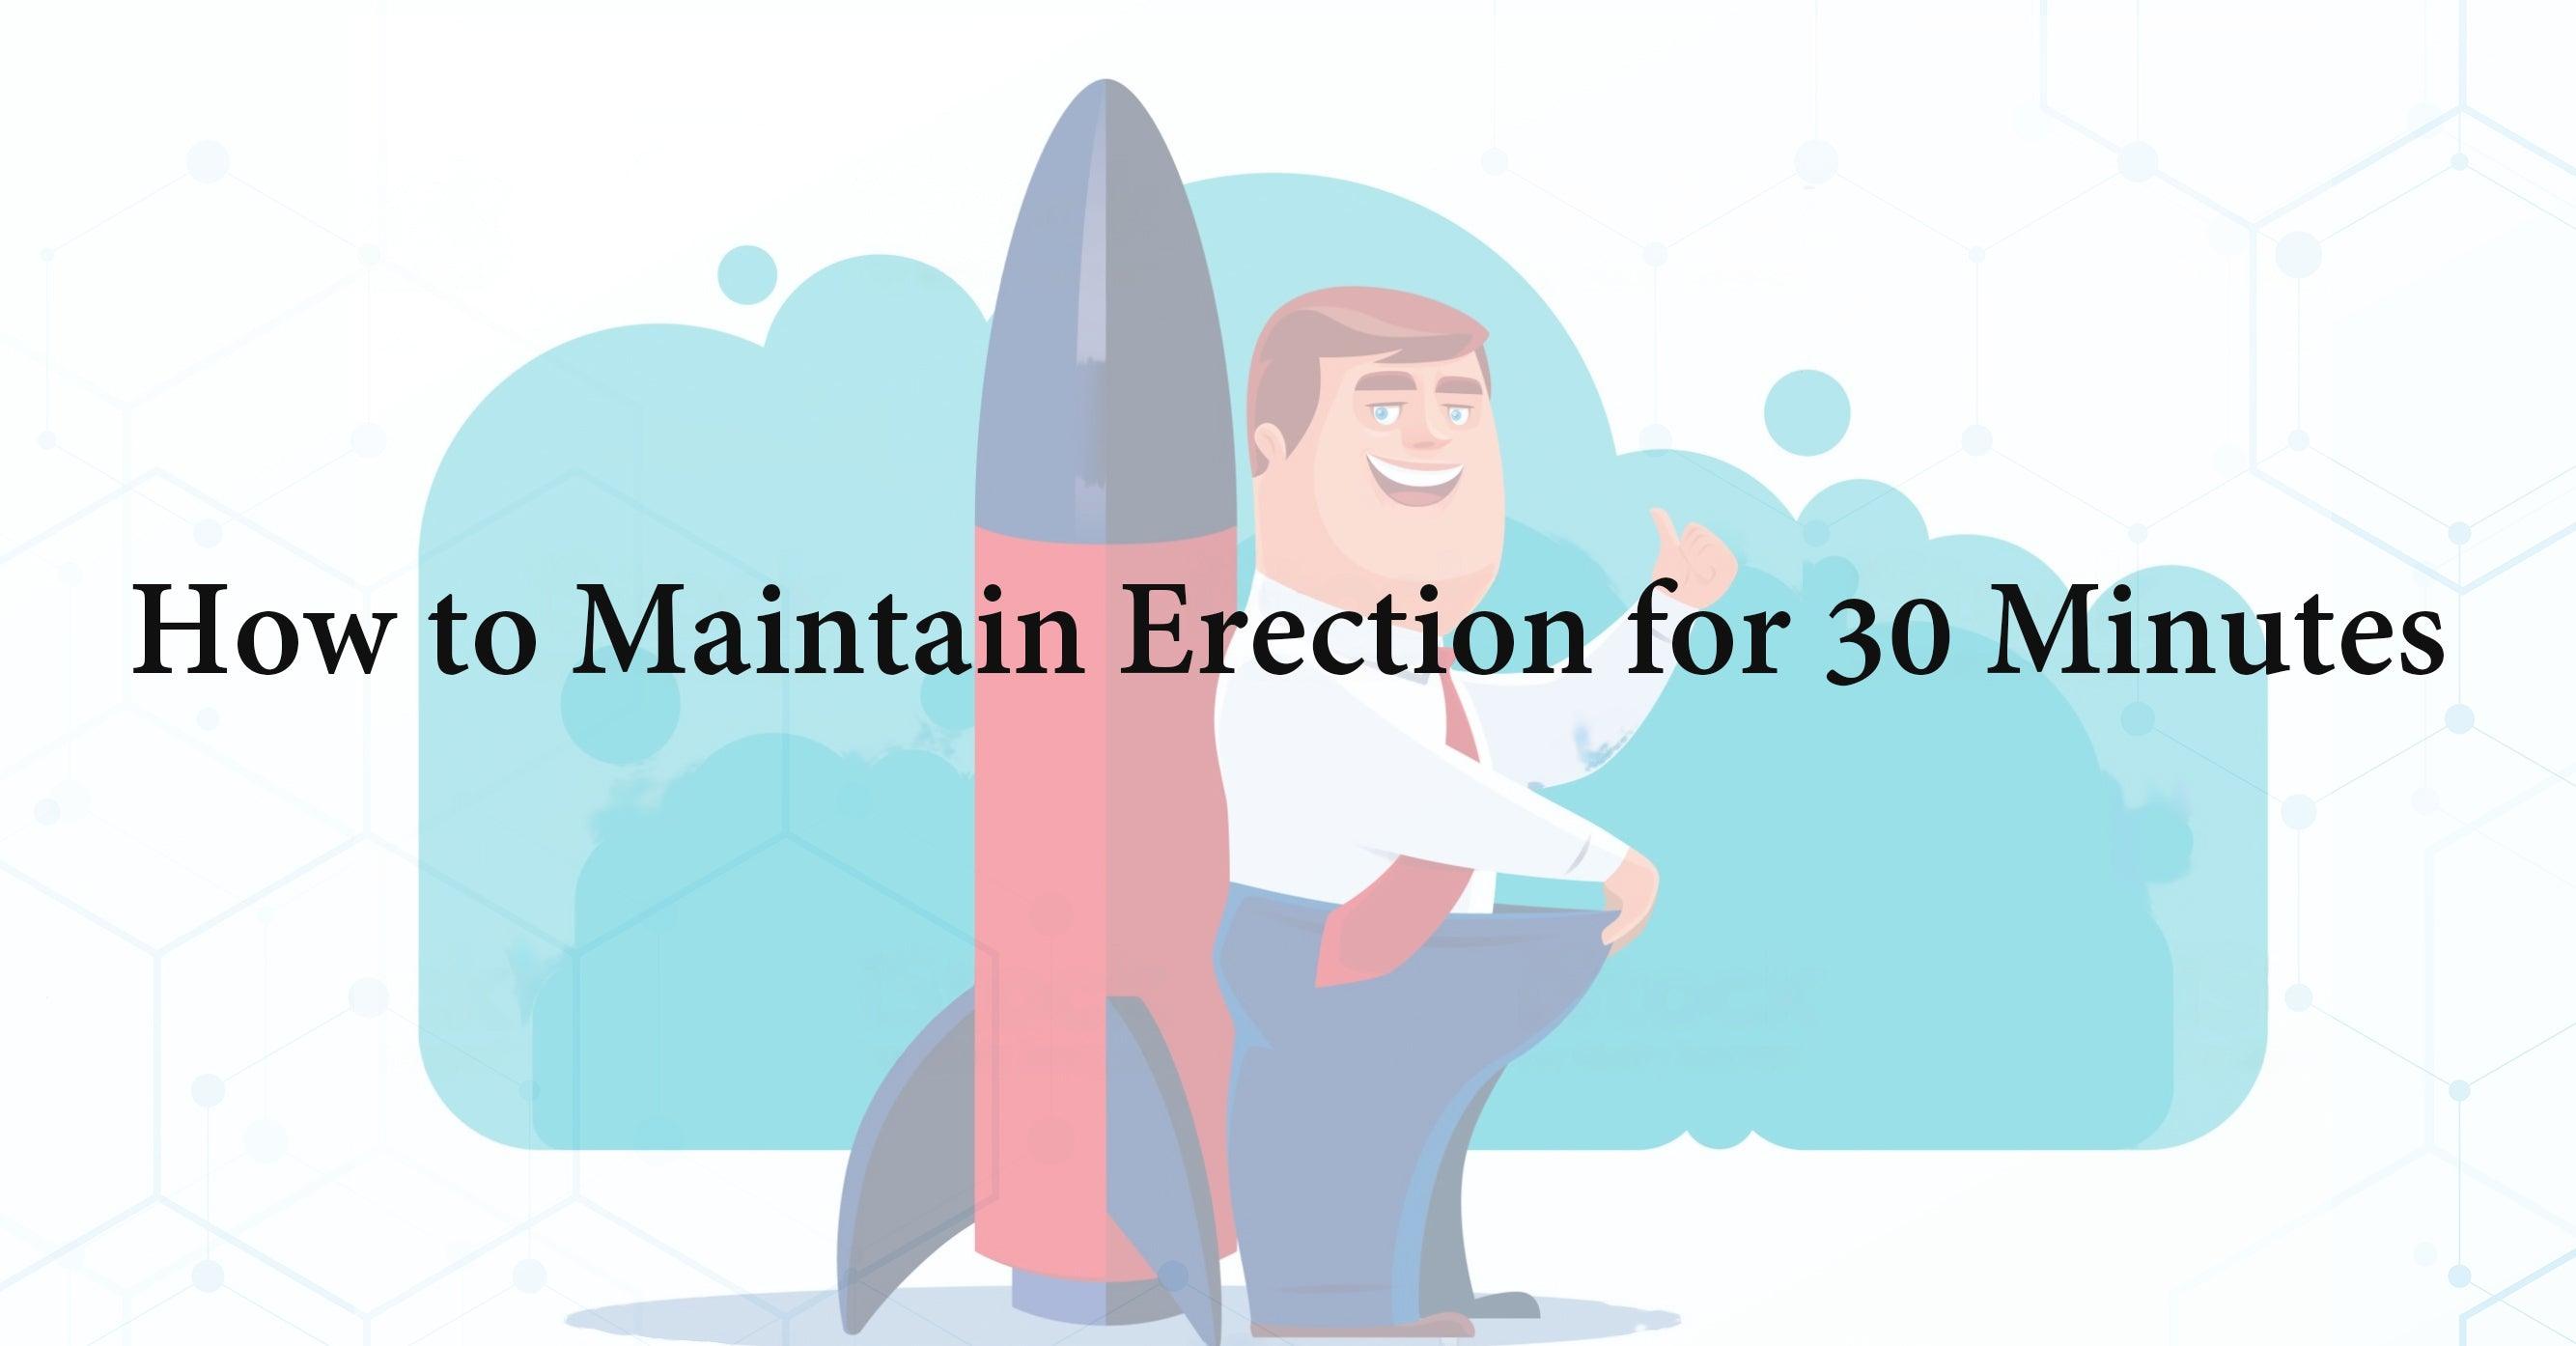 How to Maintain Erection for 30 Minutes